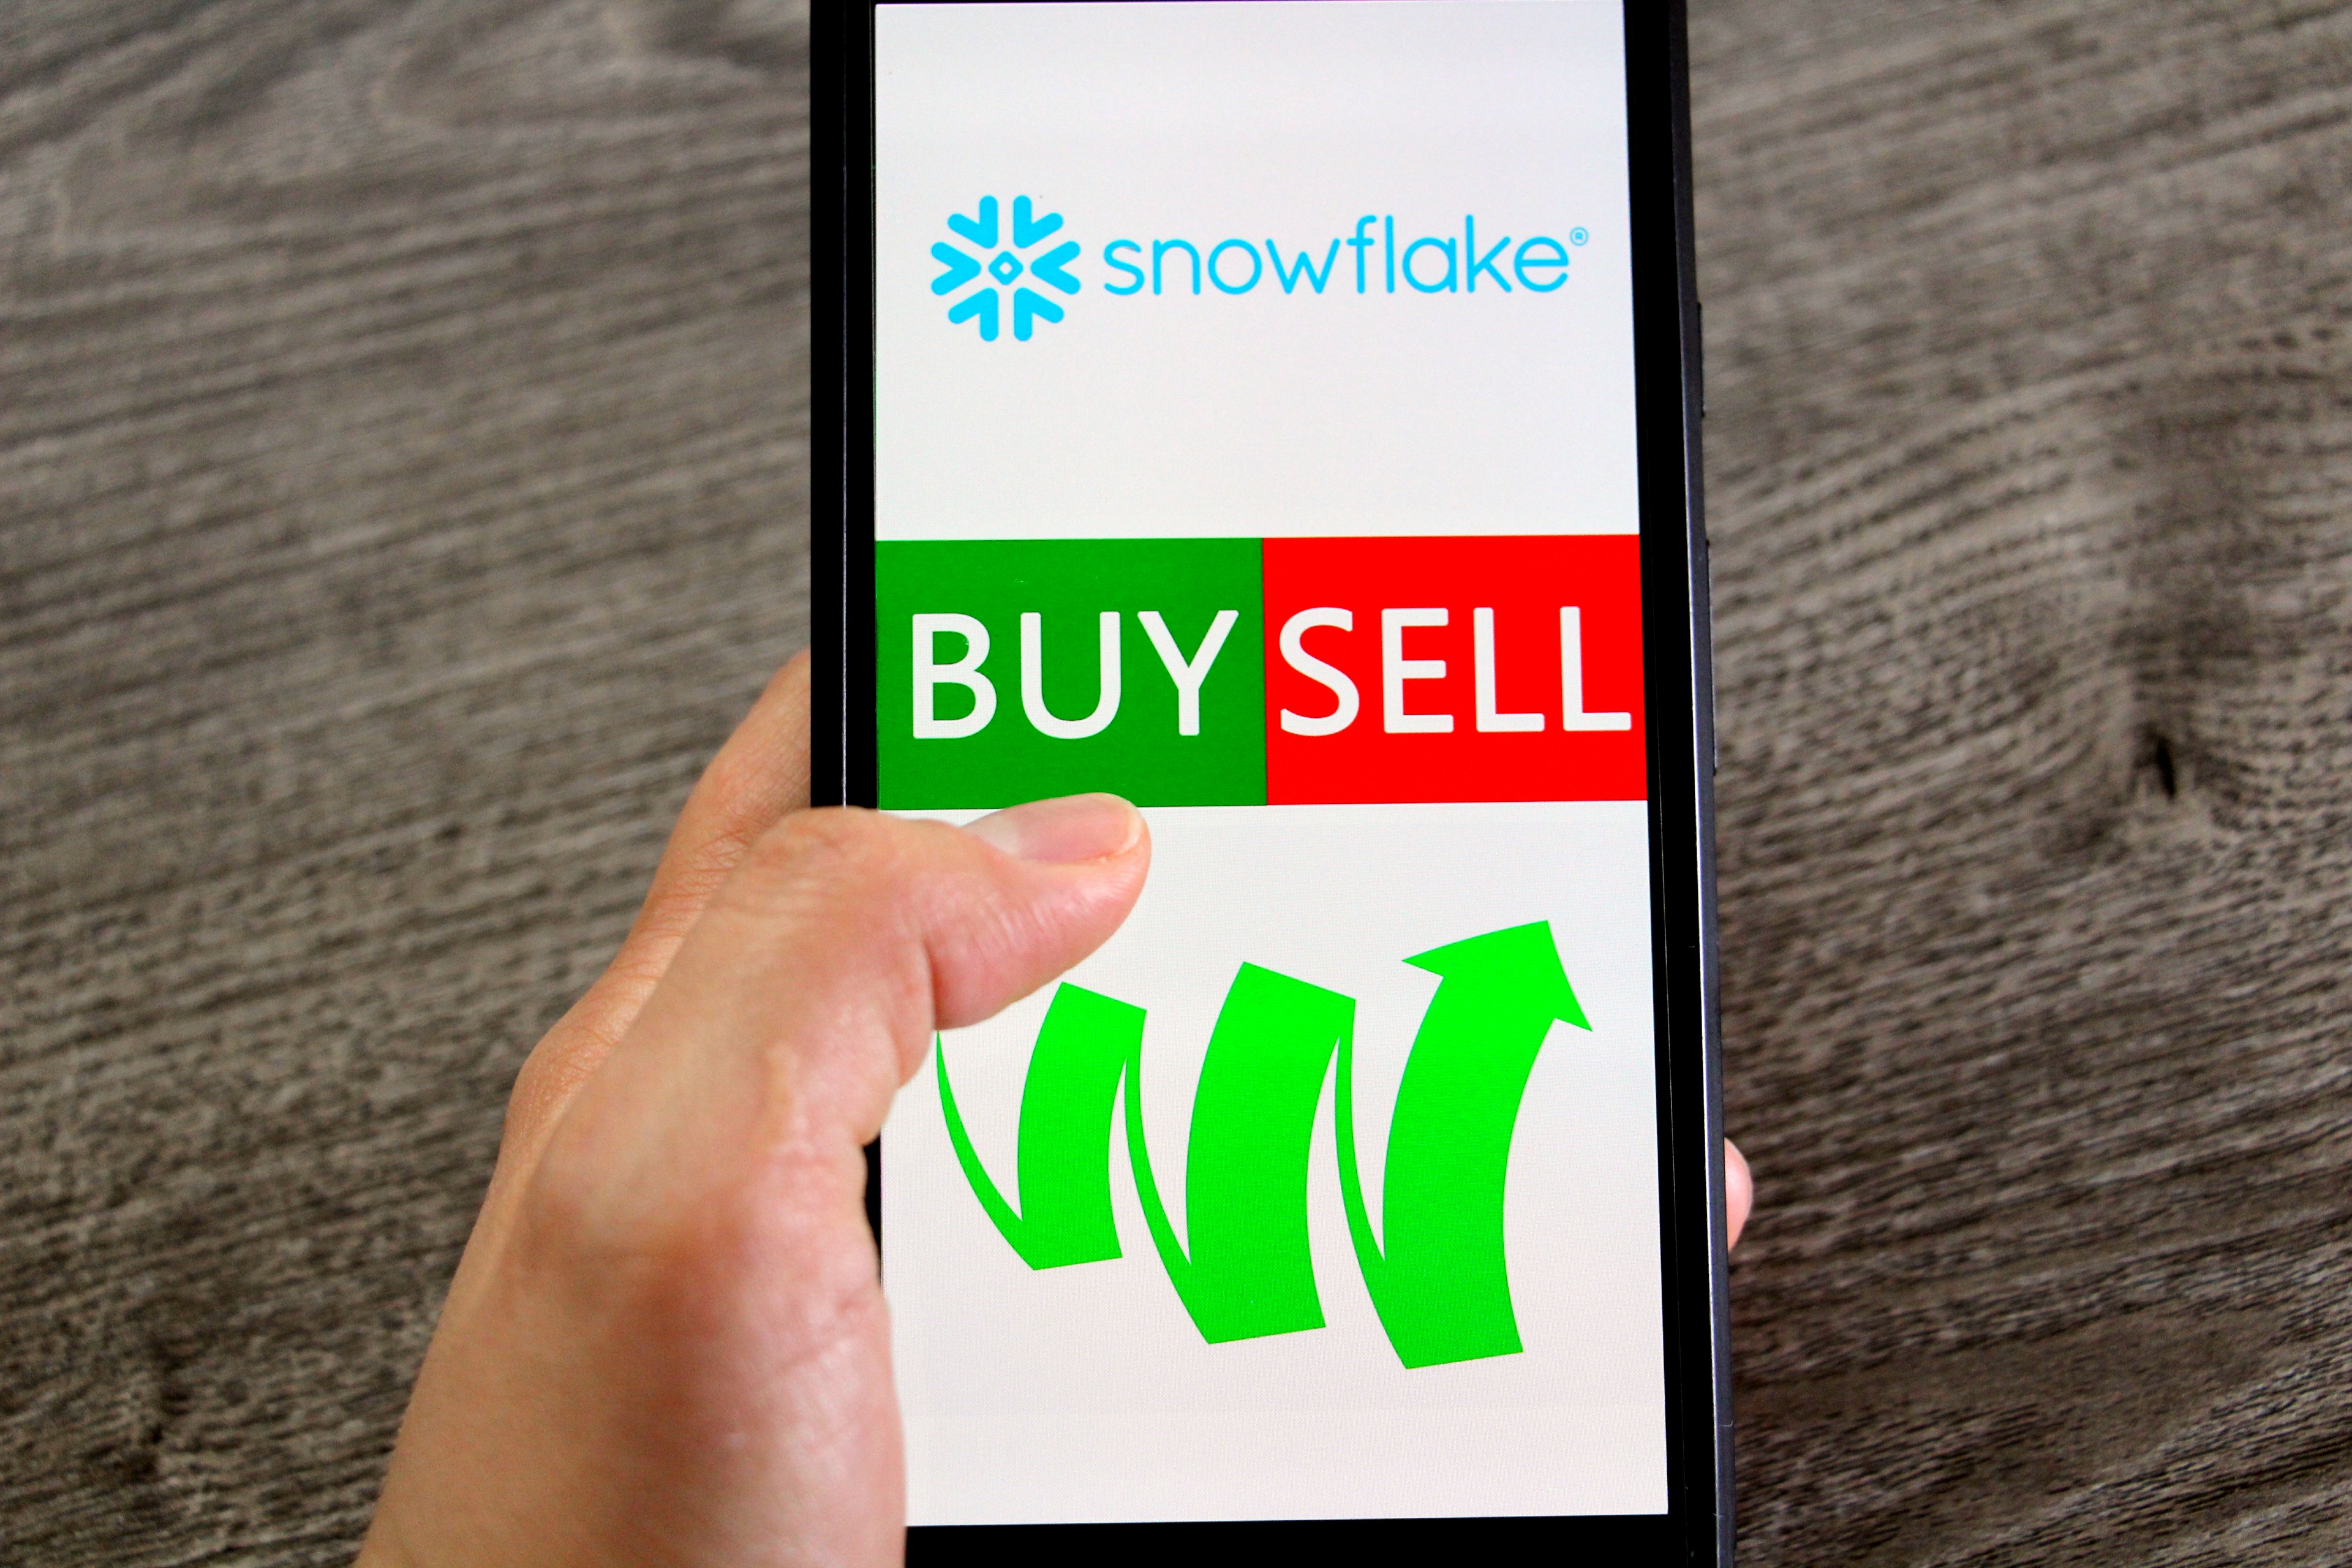 Snowflake stock could pop above $200 soon